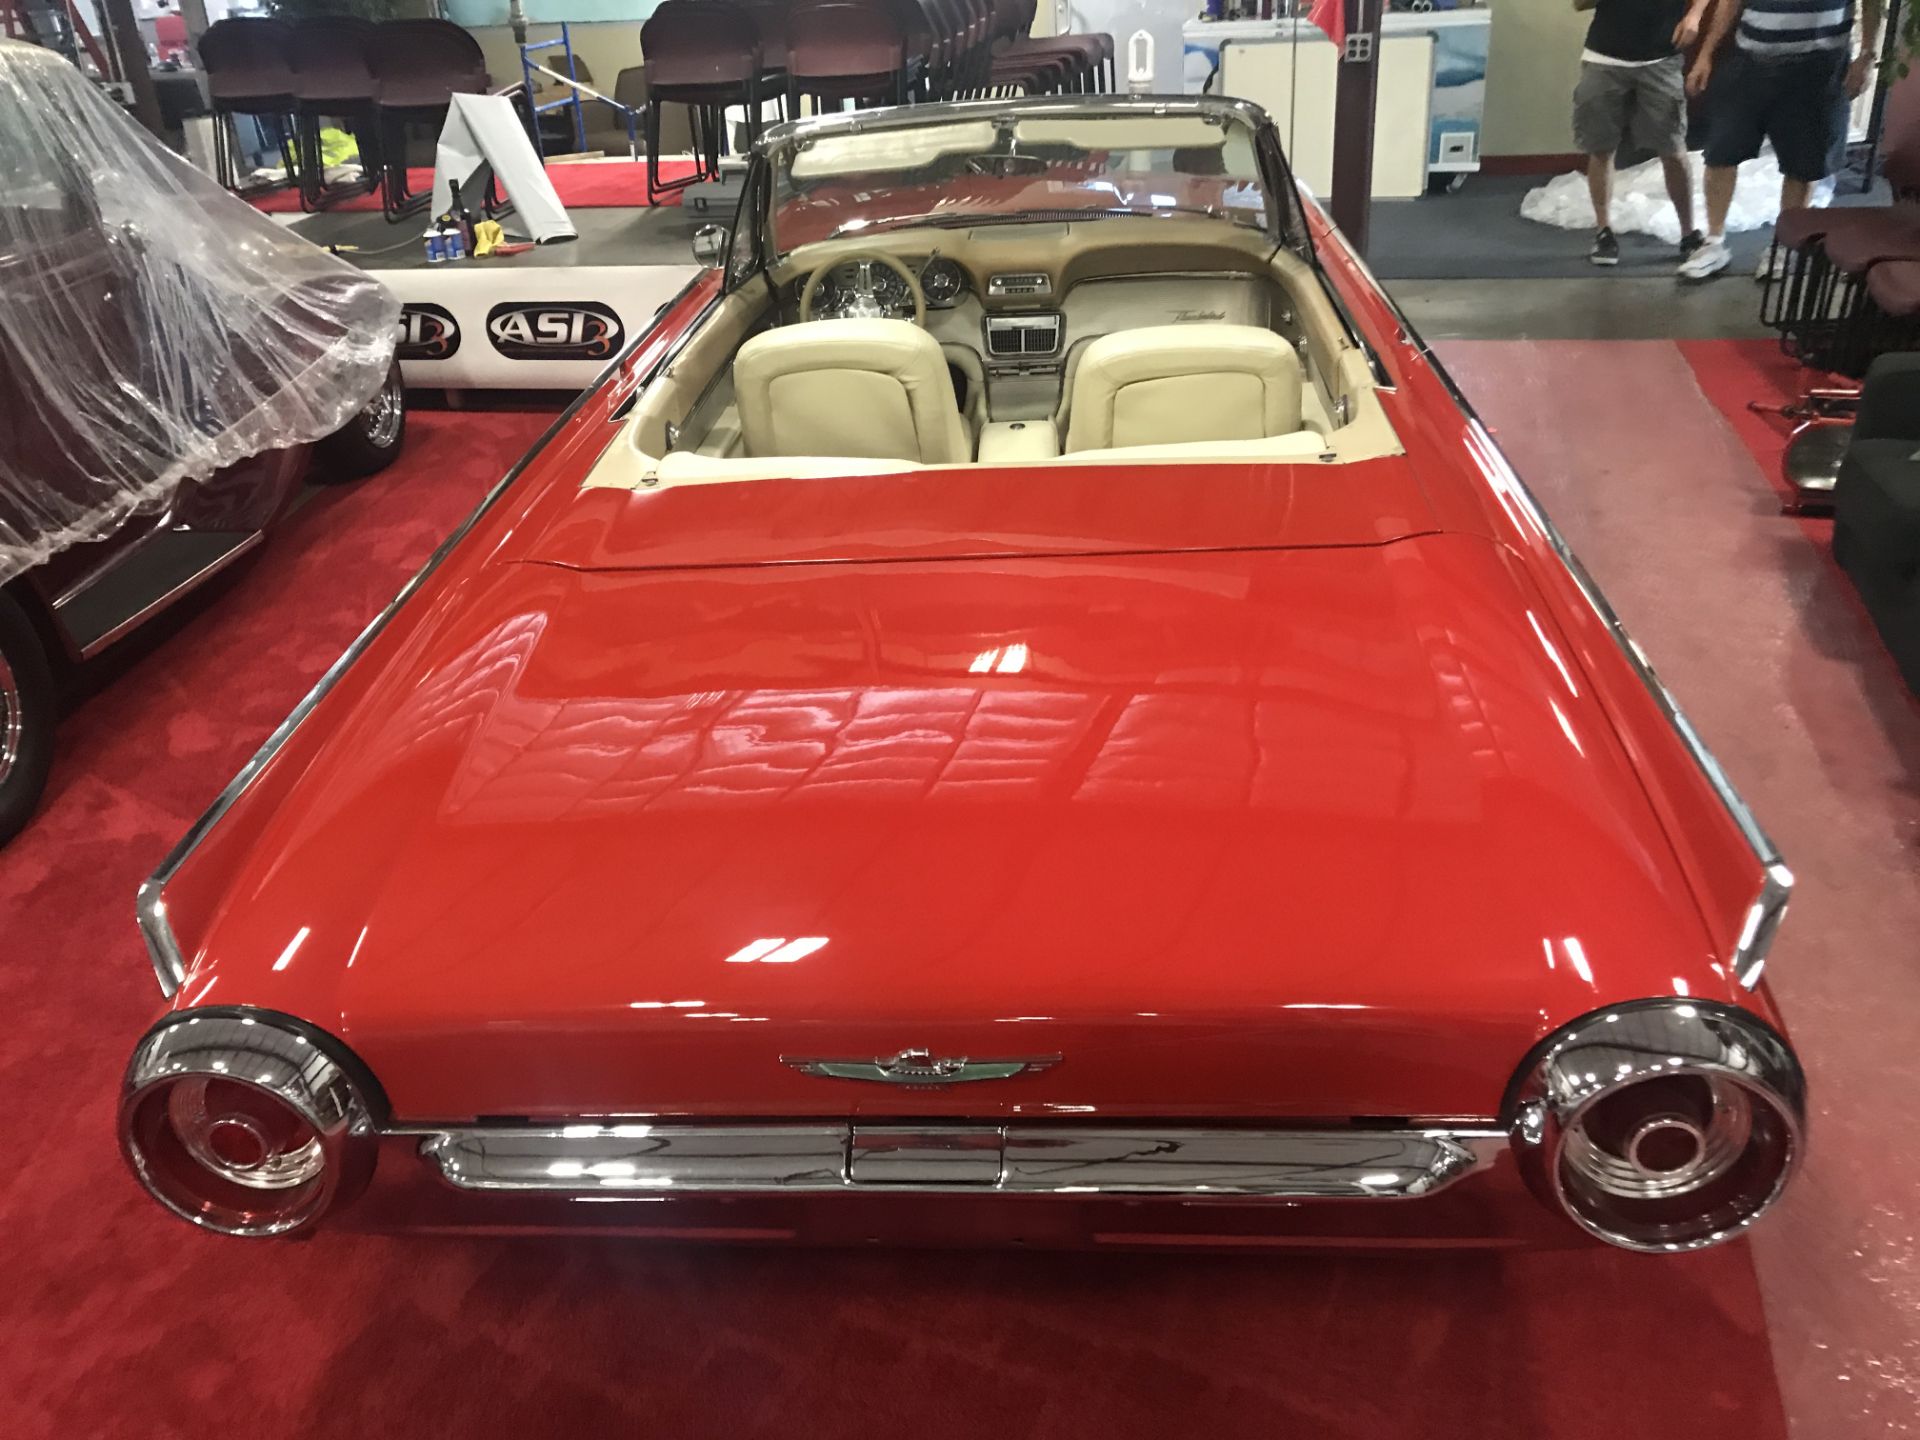 1961 CLASSIC FORD THUNDERBIRD CONVERTIBLE - Image 4 of 13